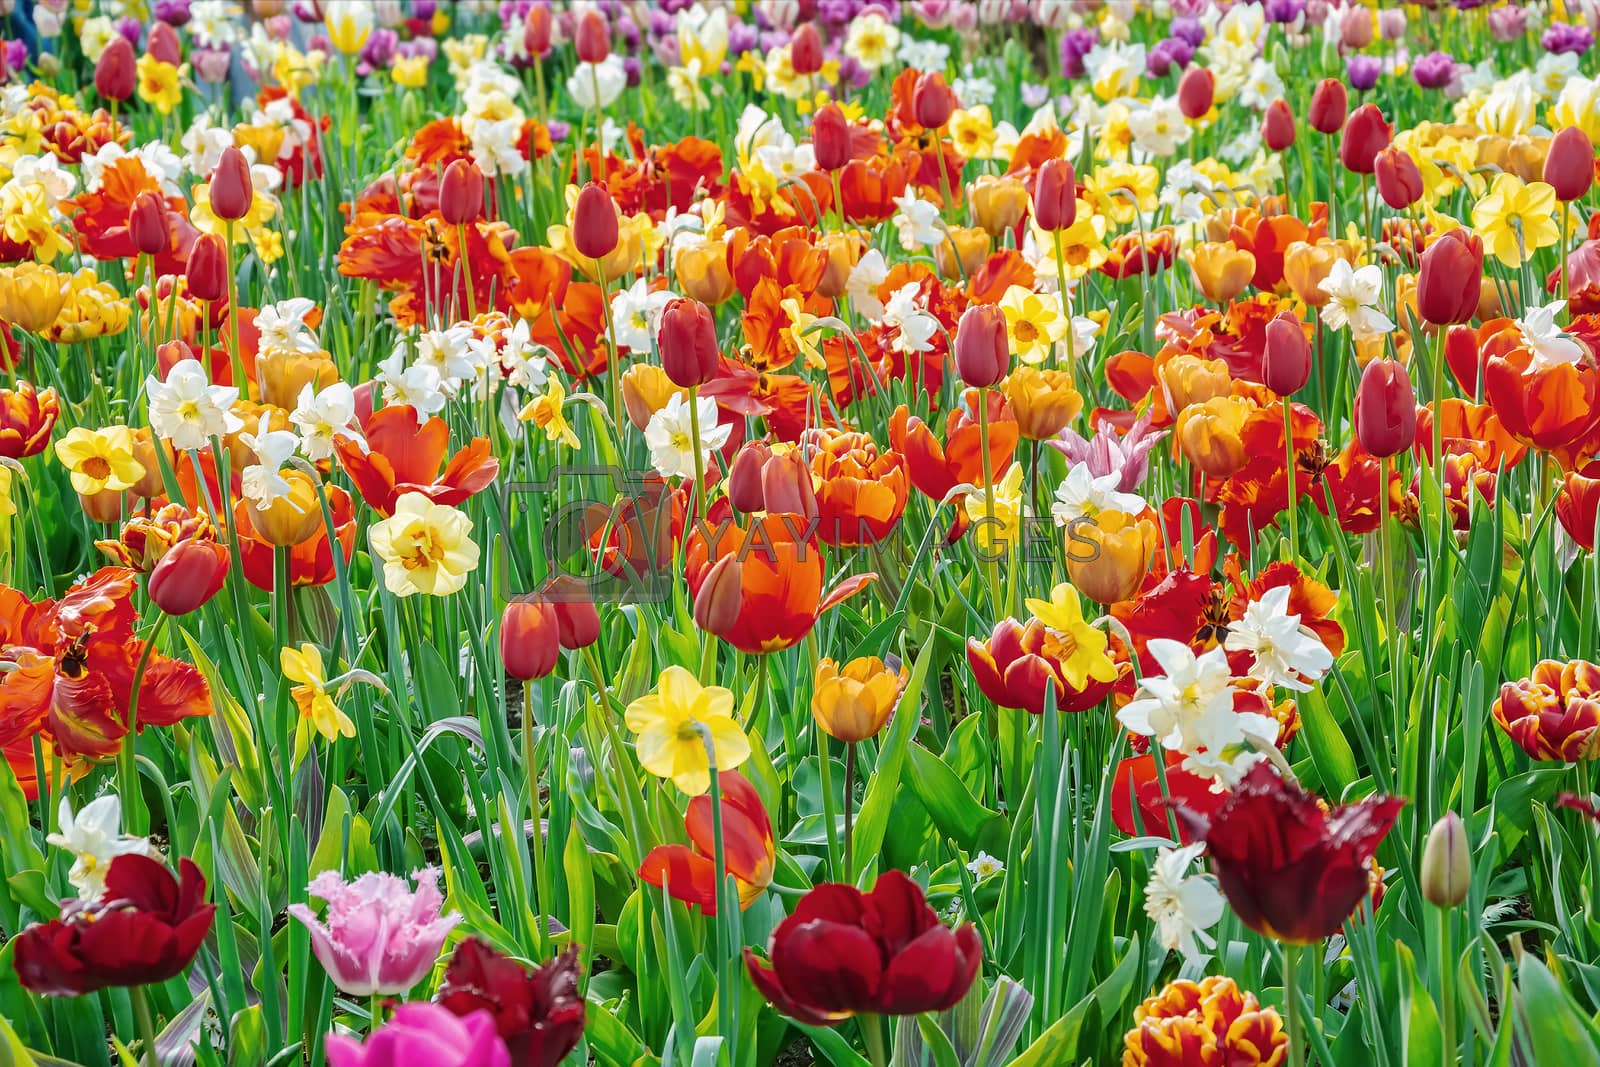 Royalty free image of Narcissus and Tulips Flowerbed by SNR